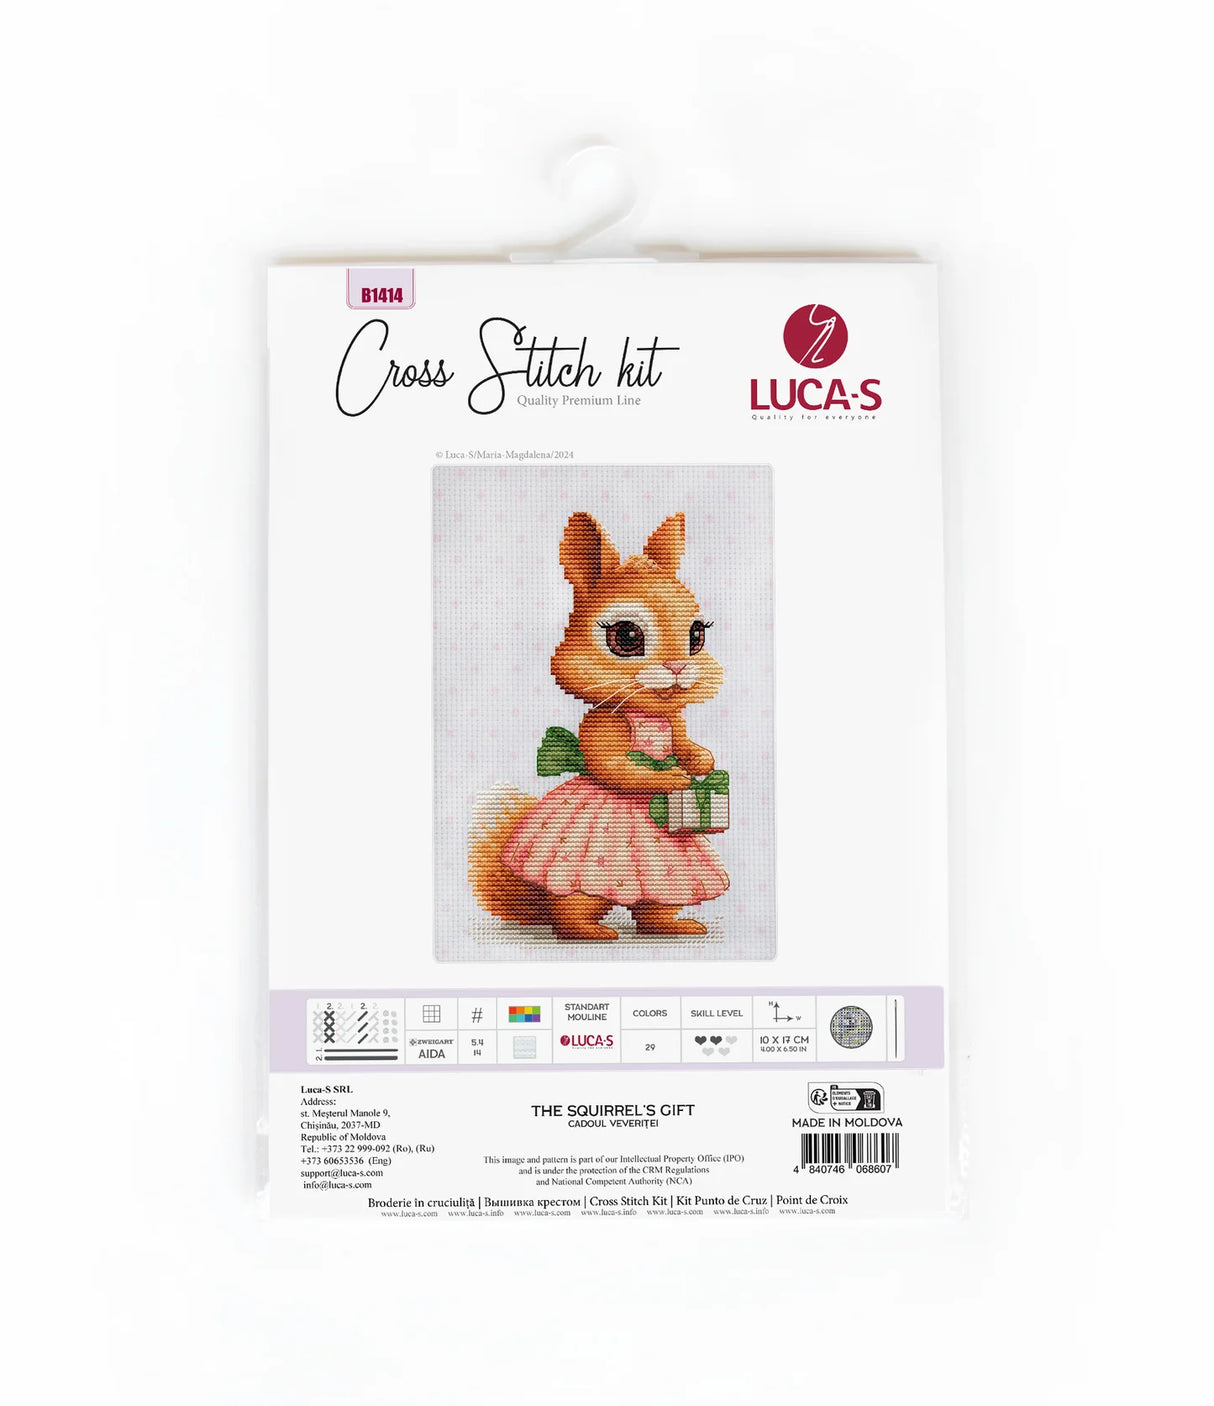 Cross stitch kit - Luca-S - The Squirrel's Gift, B1414 